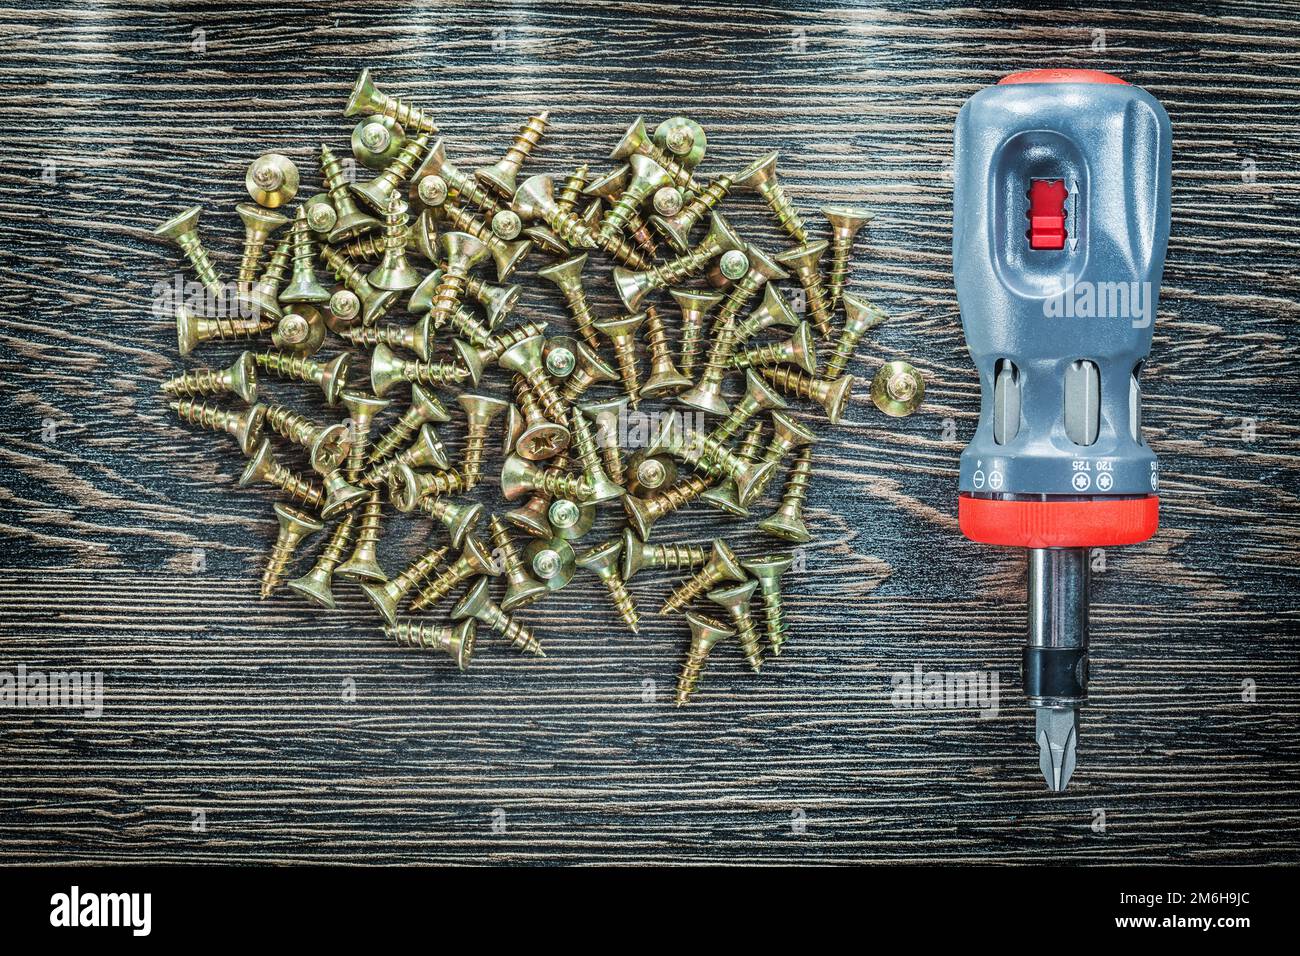 Screwdriver tapping screws on wooden board. Stock Photo